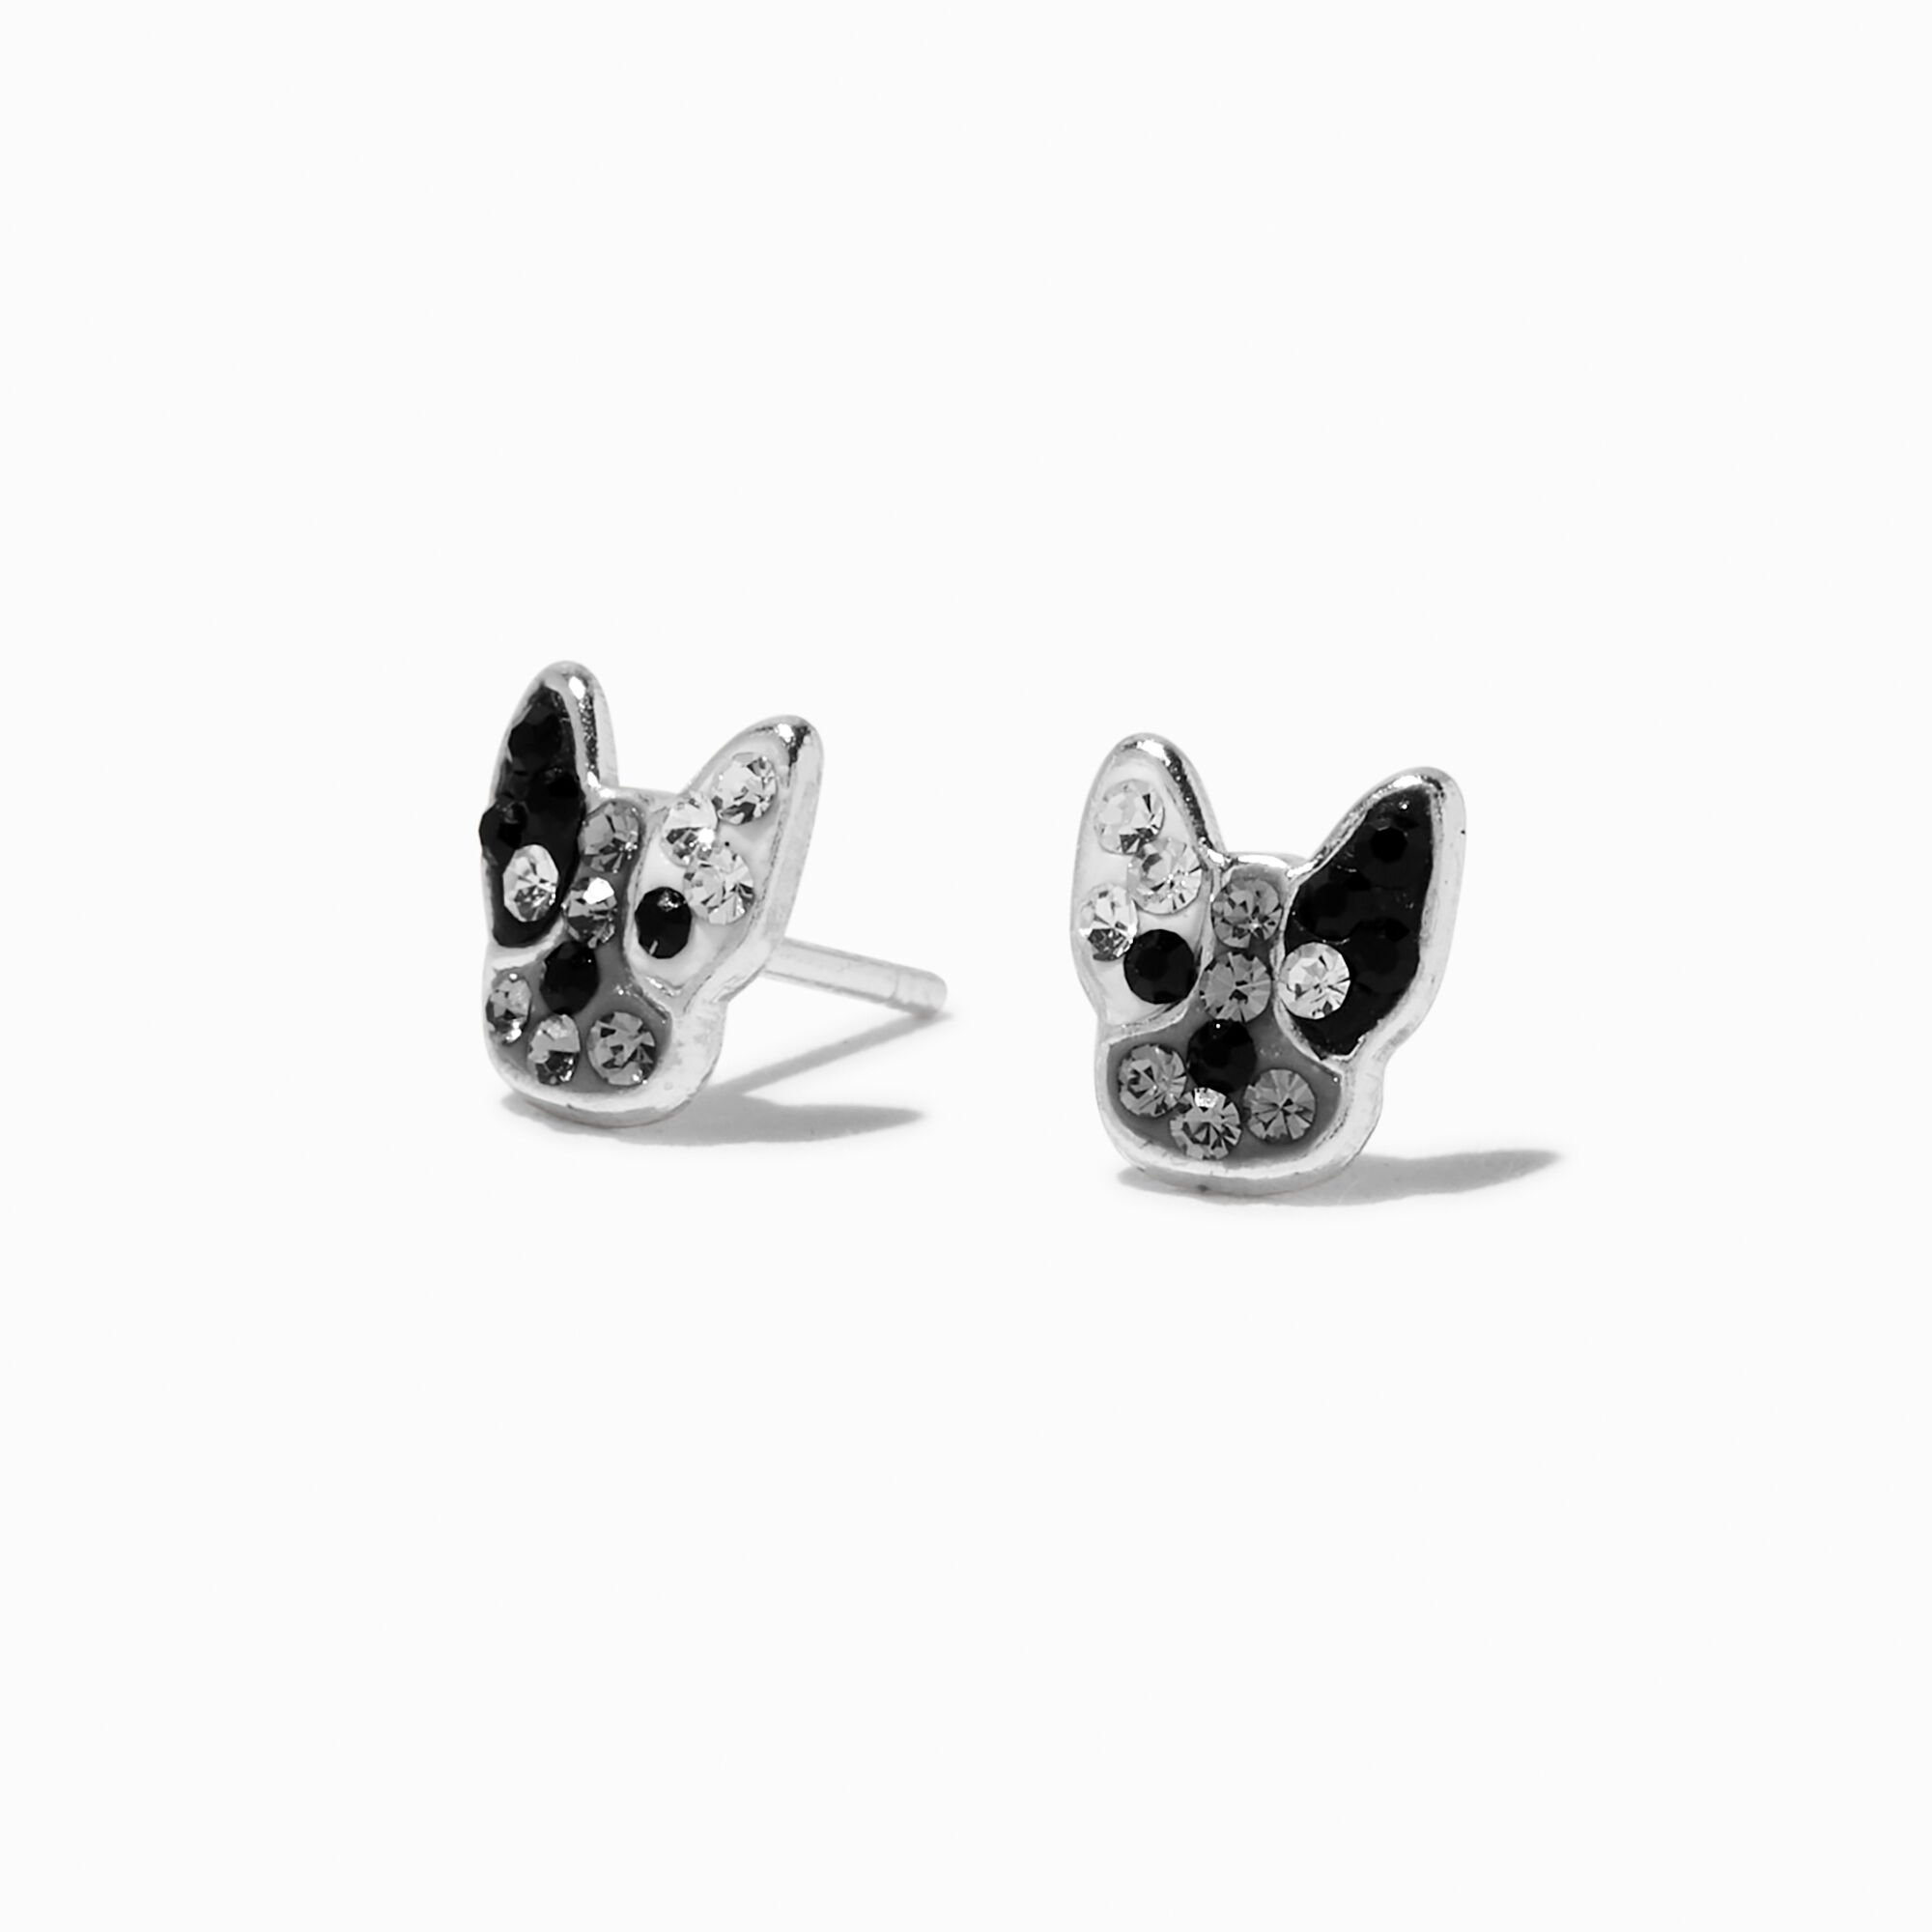 View Claires Crystal French Bulldog Stud Earrings Silver information